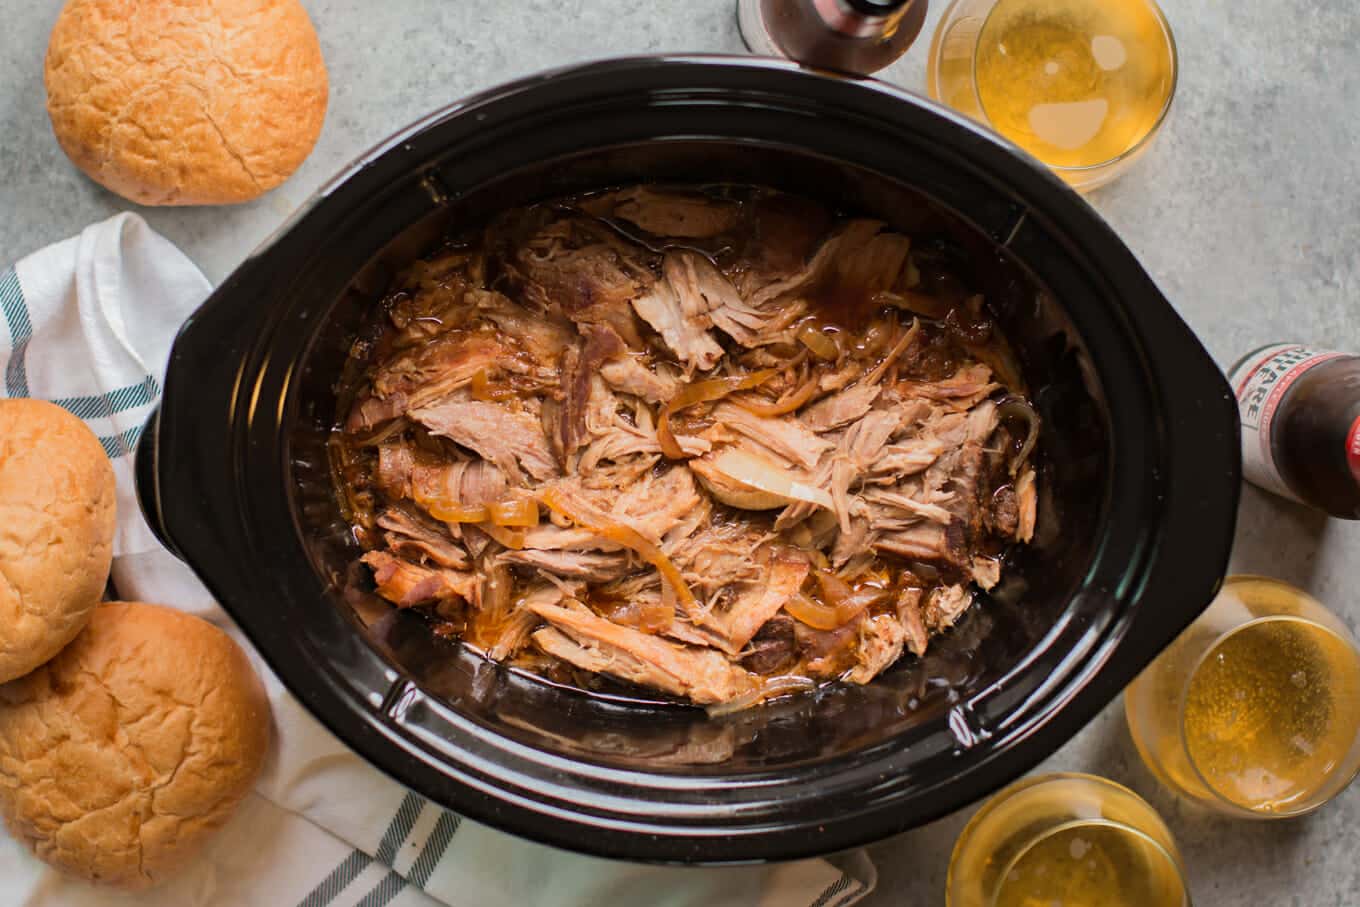 shredded pork in slow cooker with buns on the side.